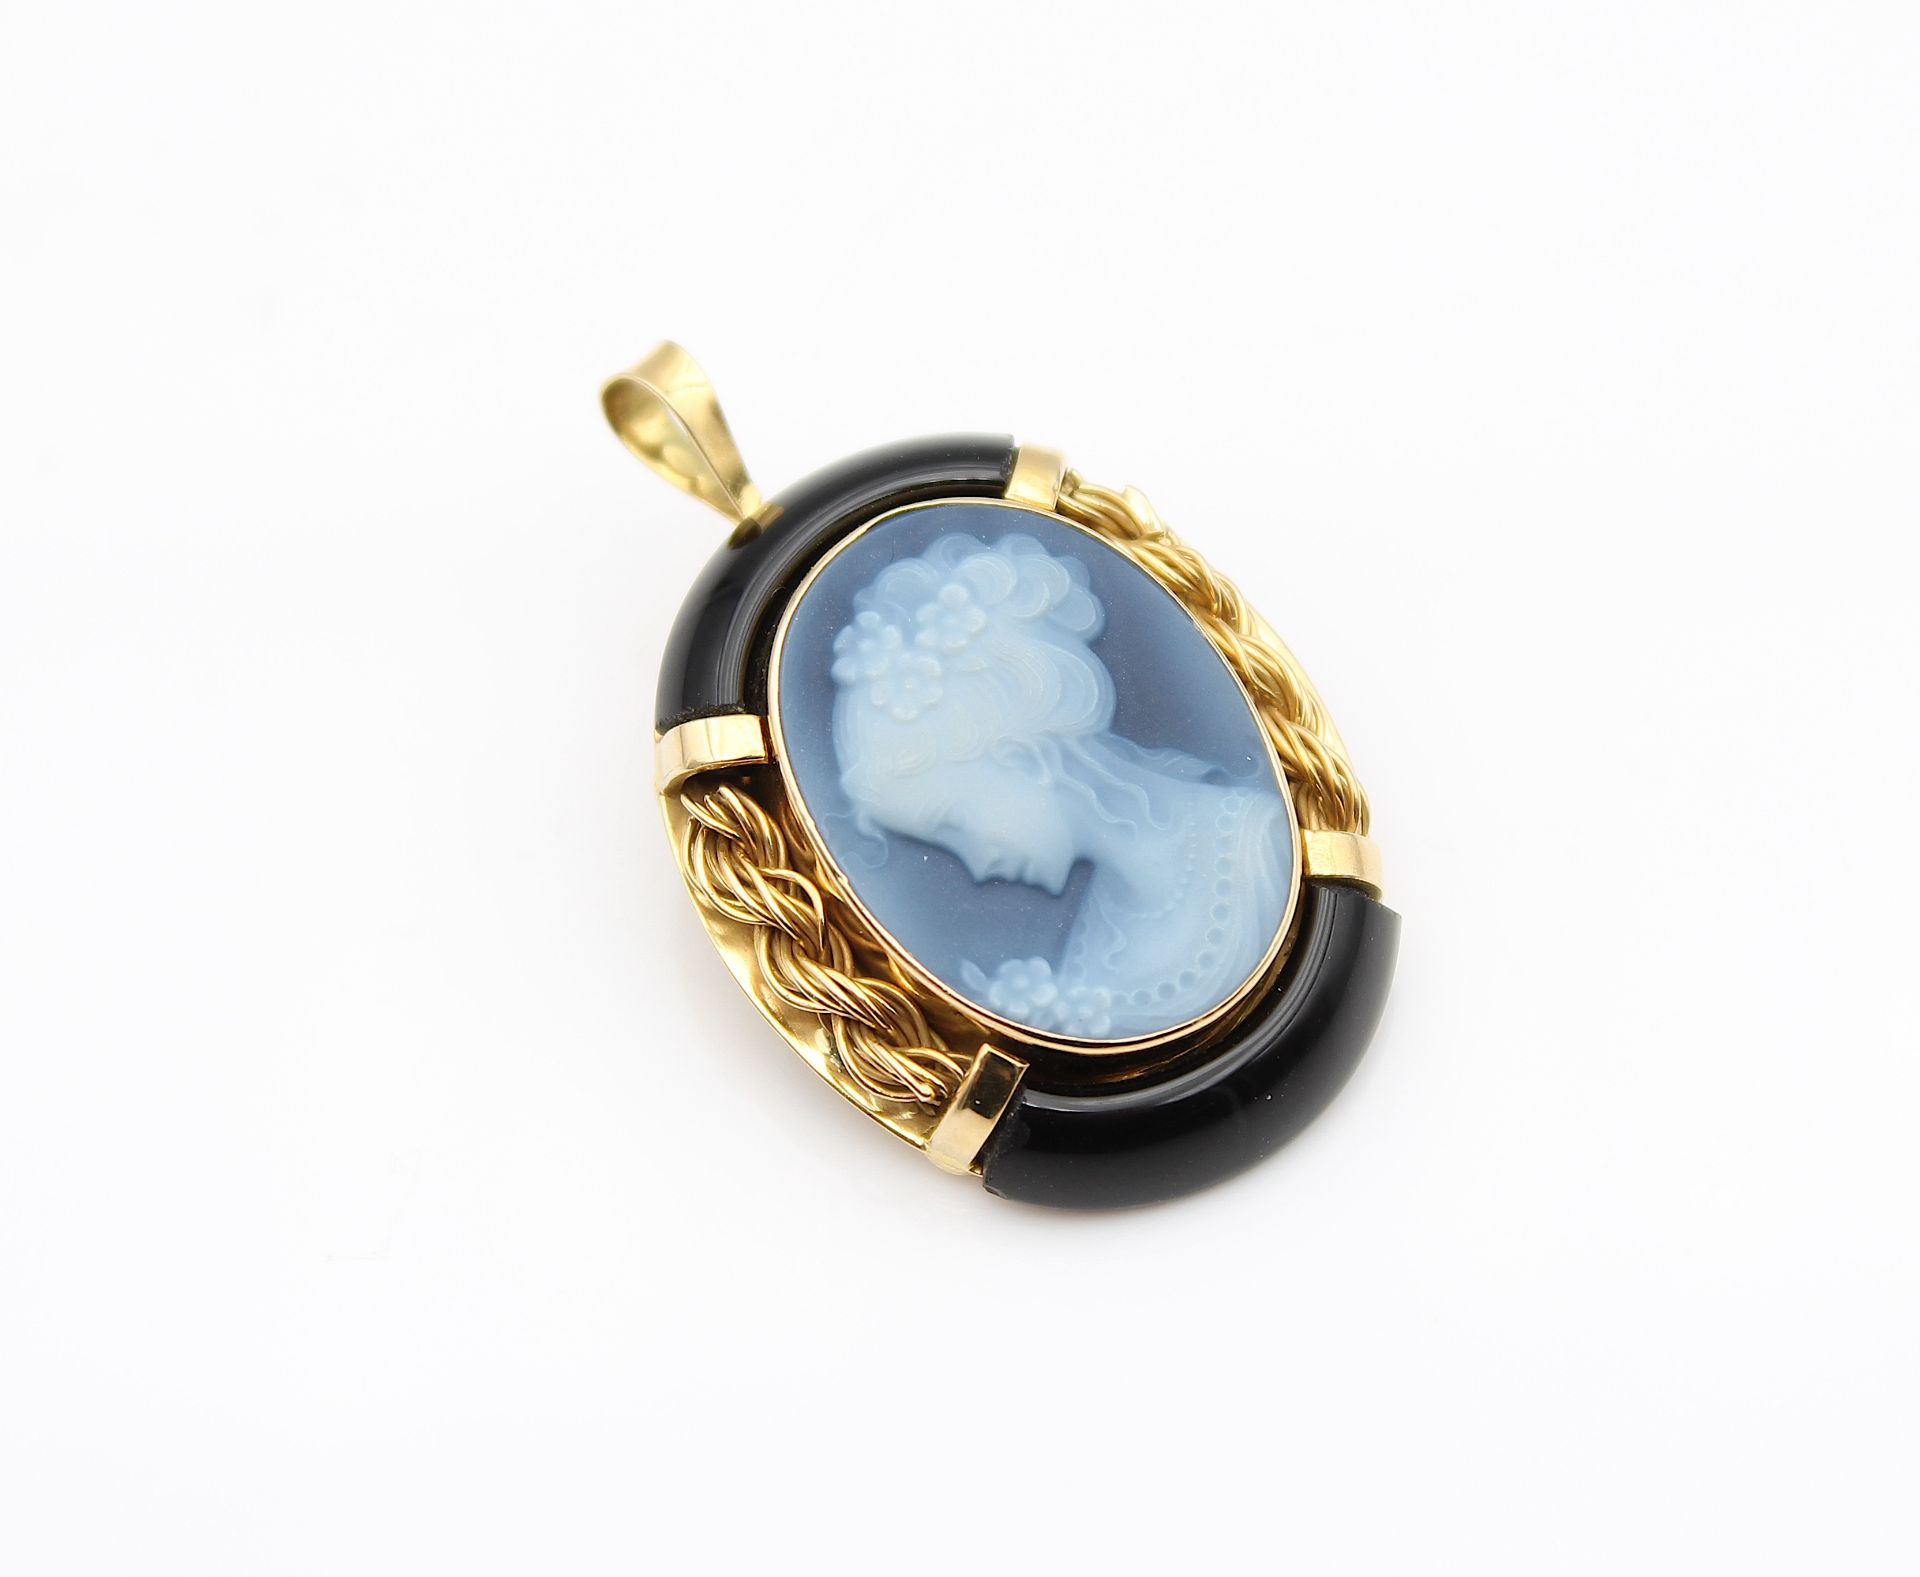 Unique brooch/pendant with agate cameo - Image 2 of 3